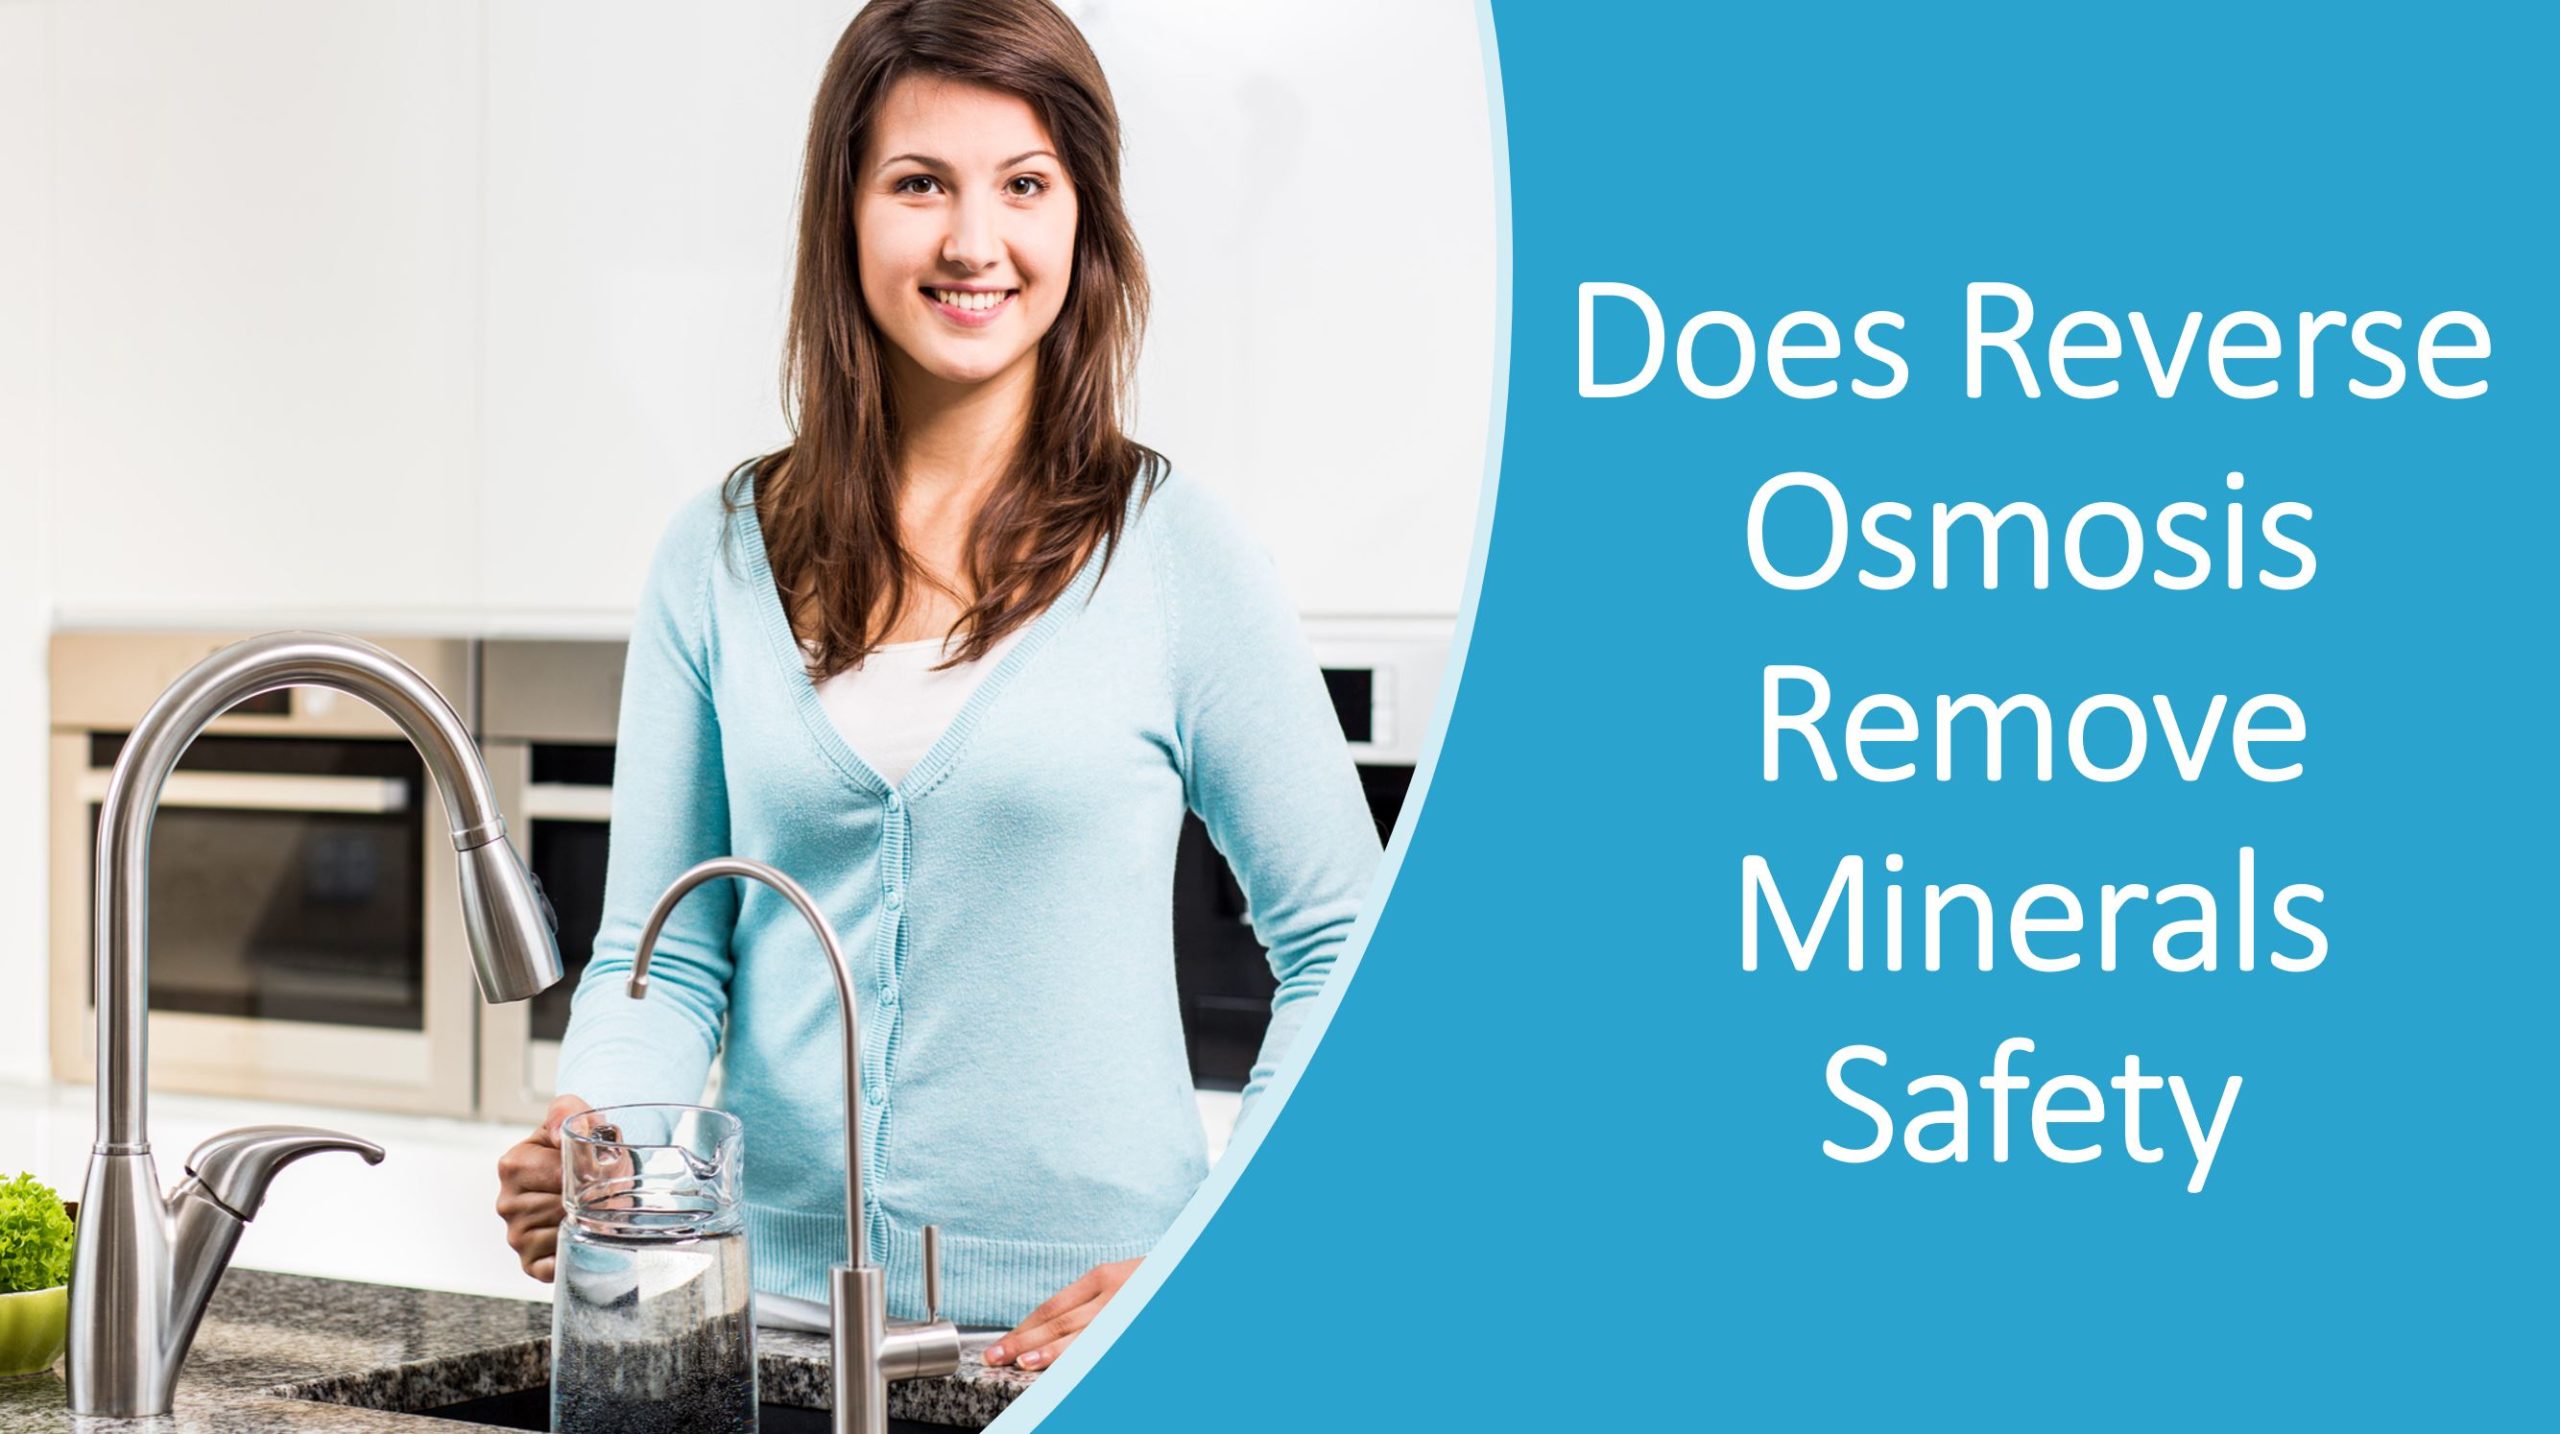 Does Reverse Osmosis Remove Minerals From Water?